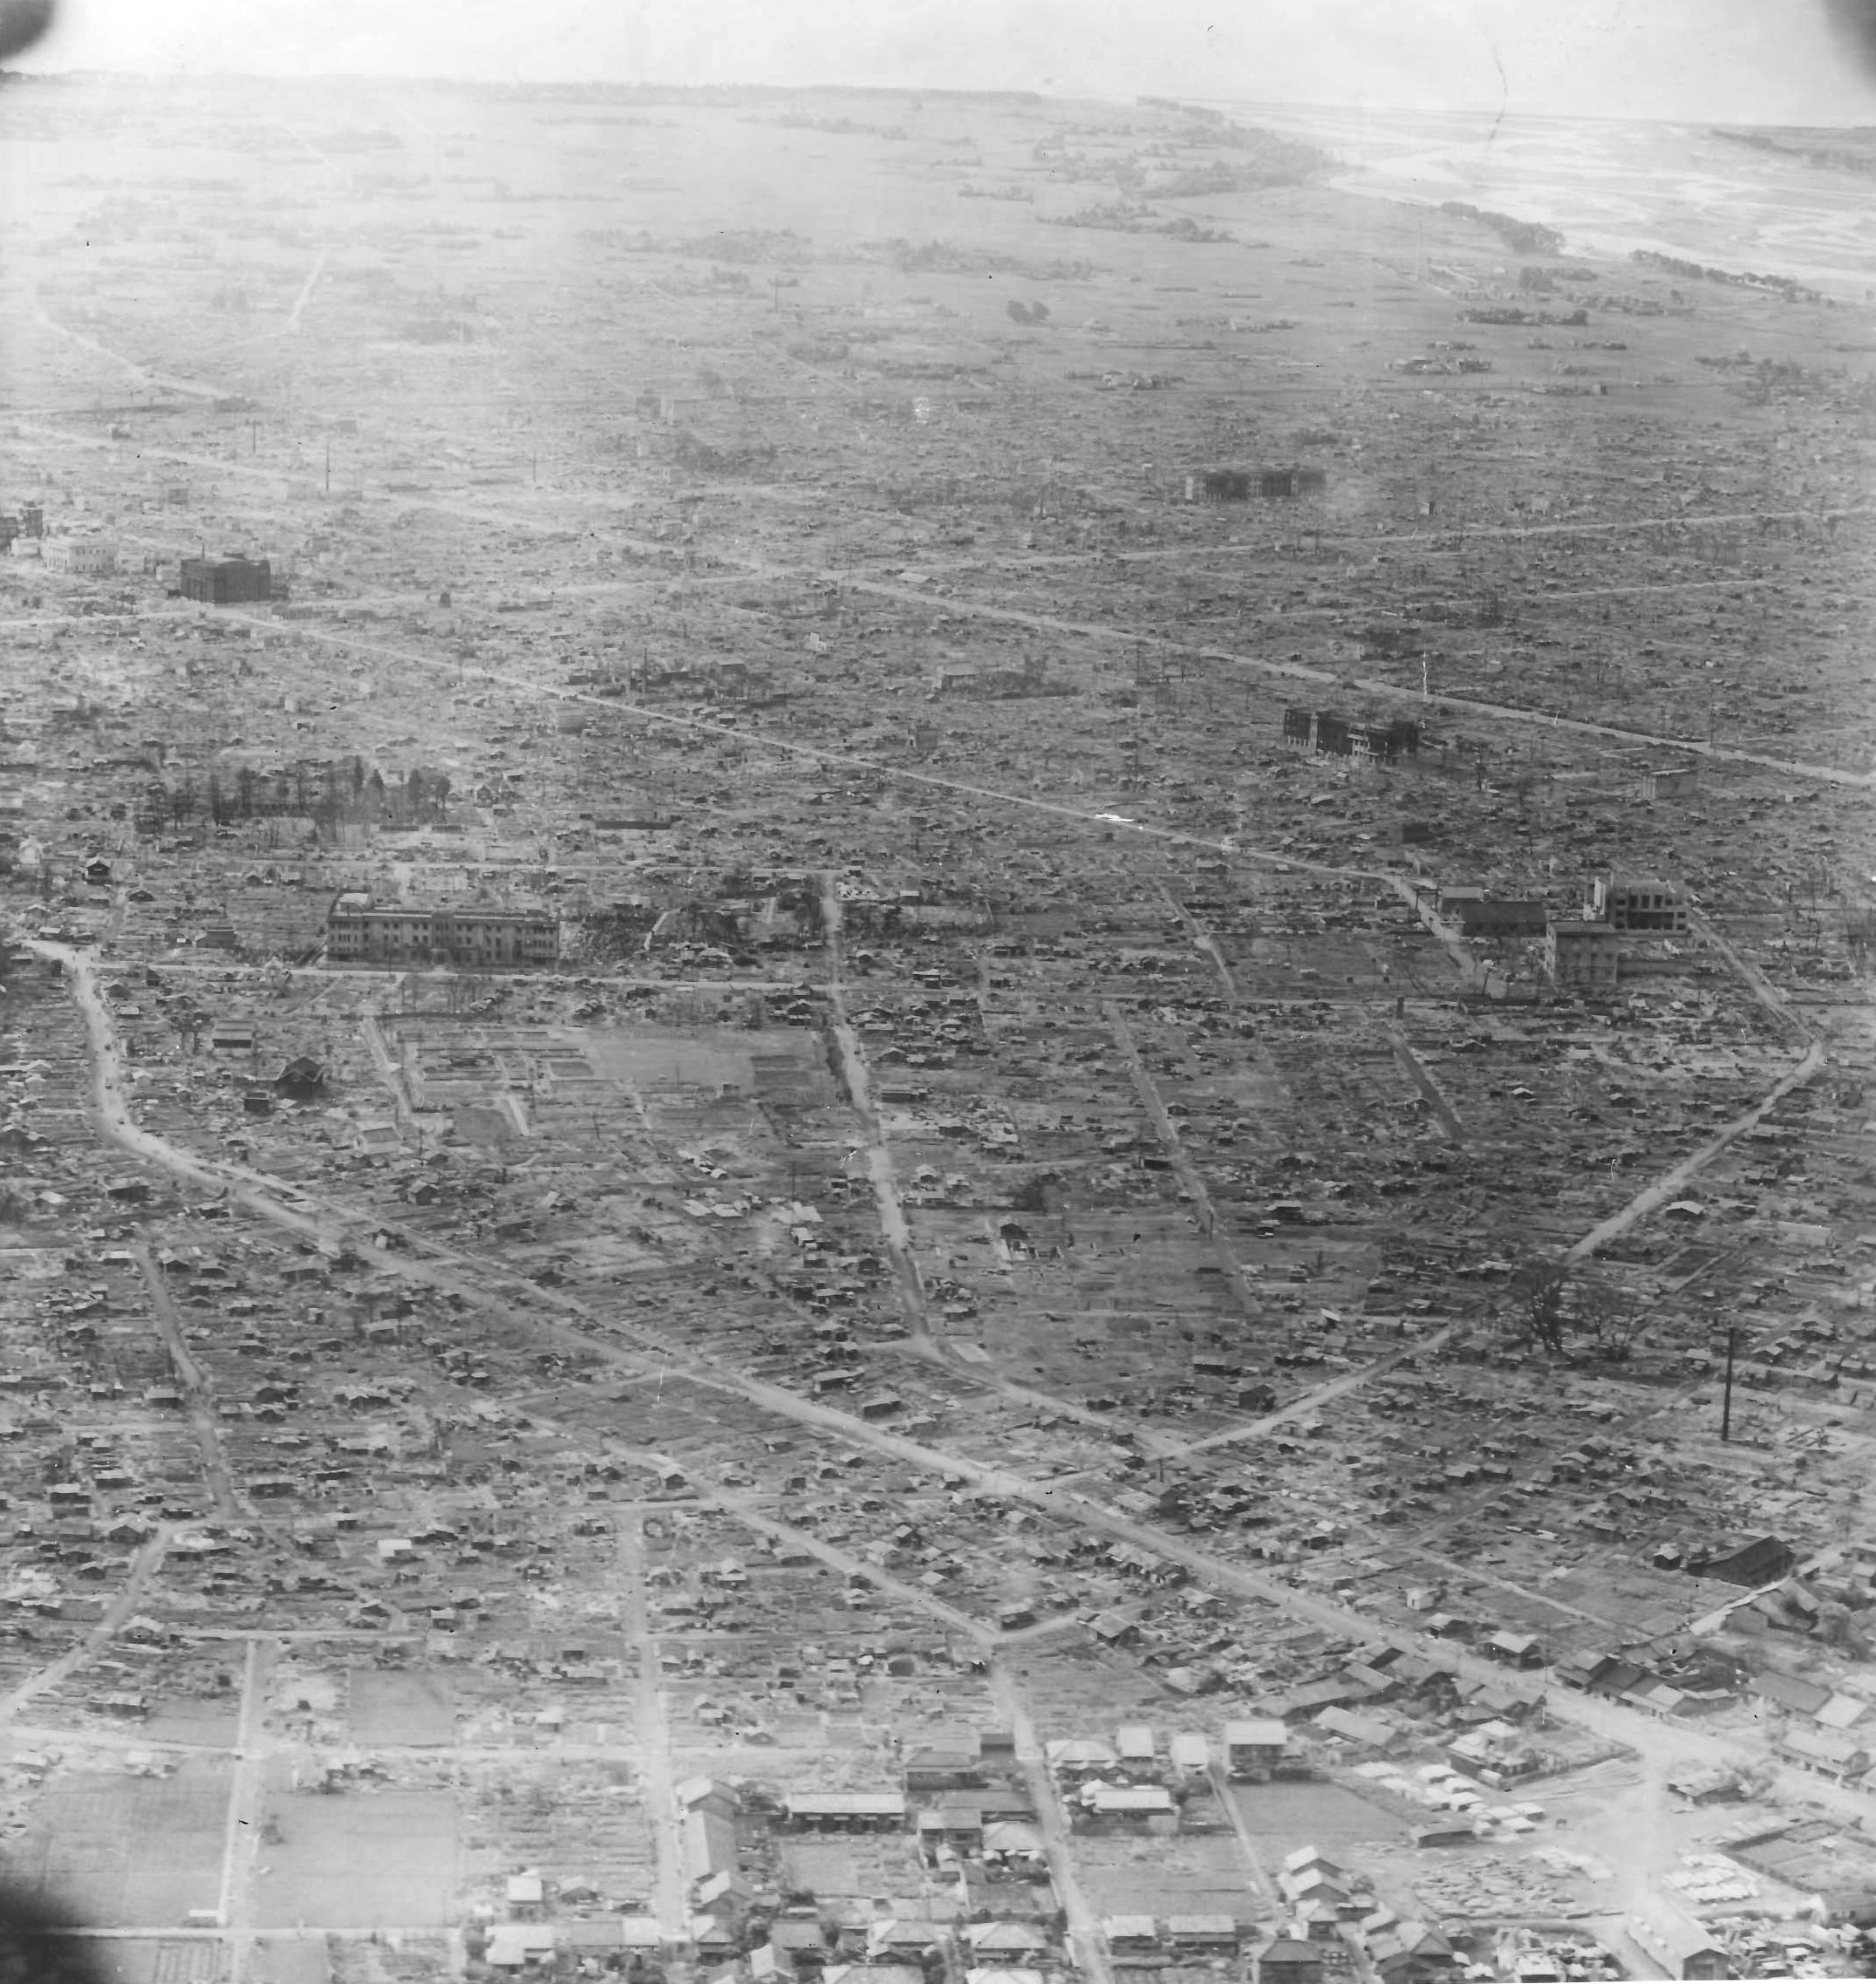 Aerial photo taken from aircraft from the USS Wasp (Essex-class) showing the near complete destruction of the Japanese city of Nagoya, late Aug 1945